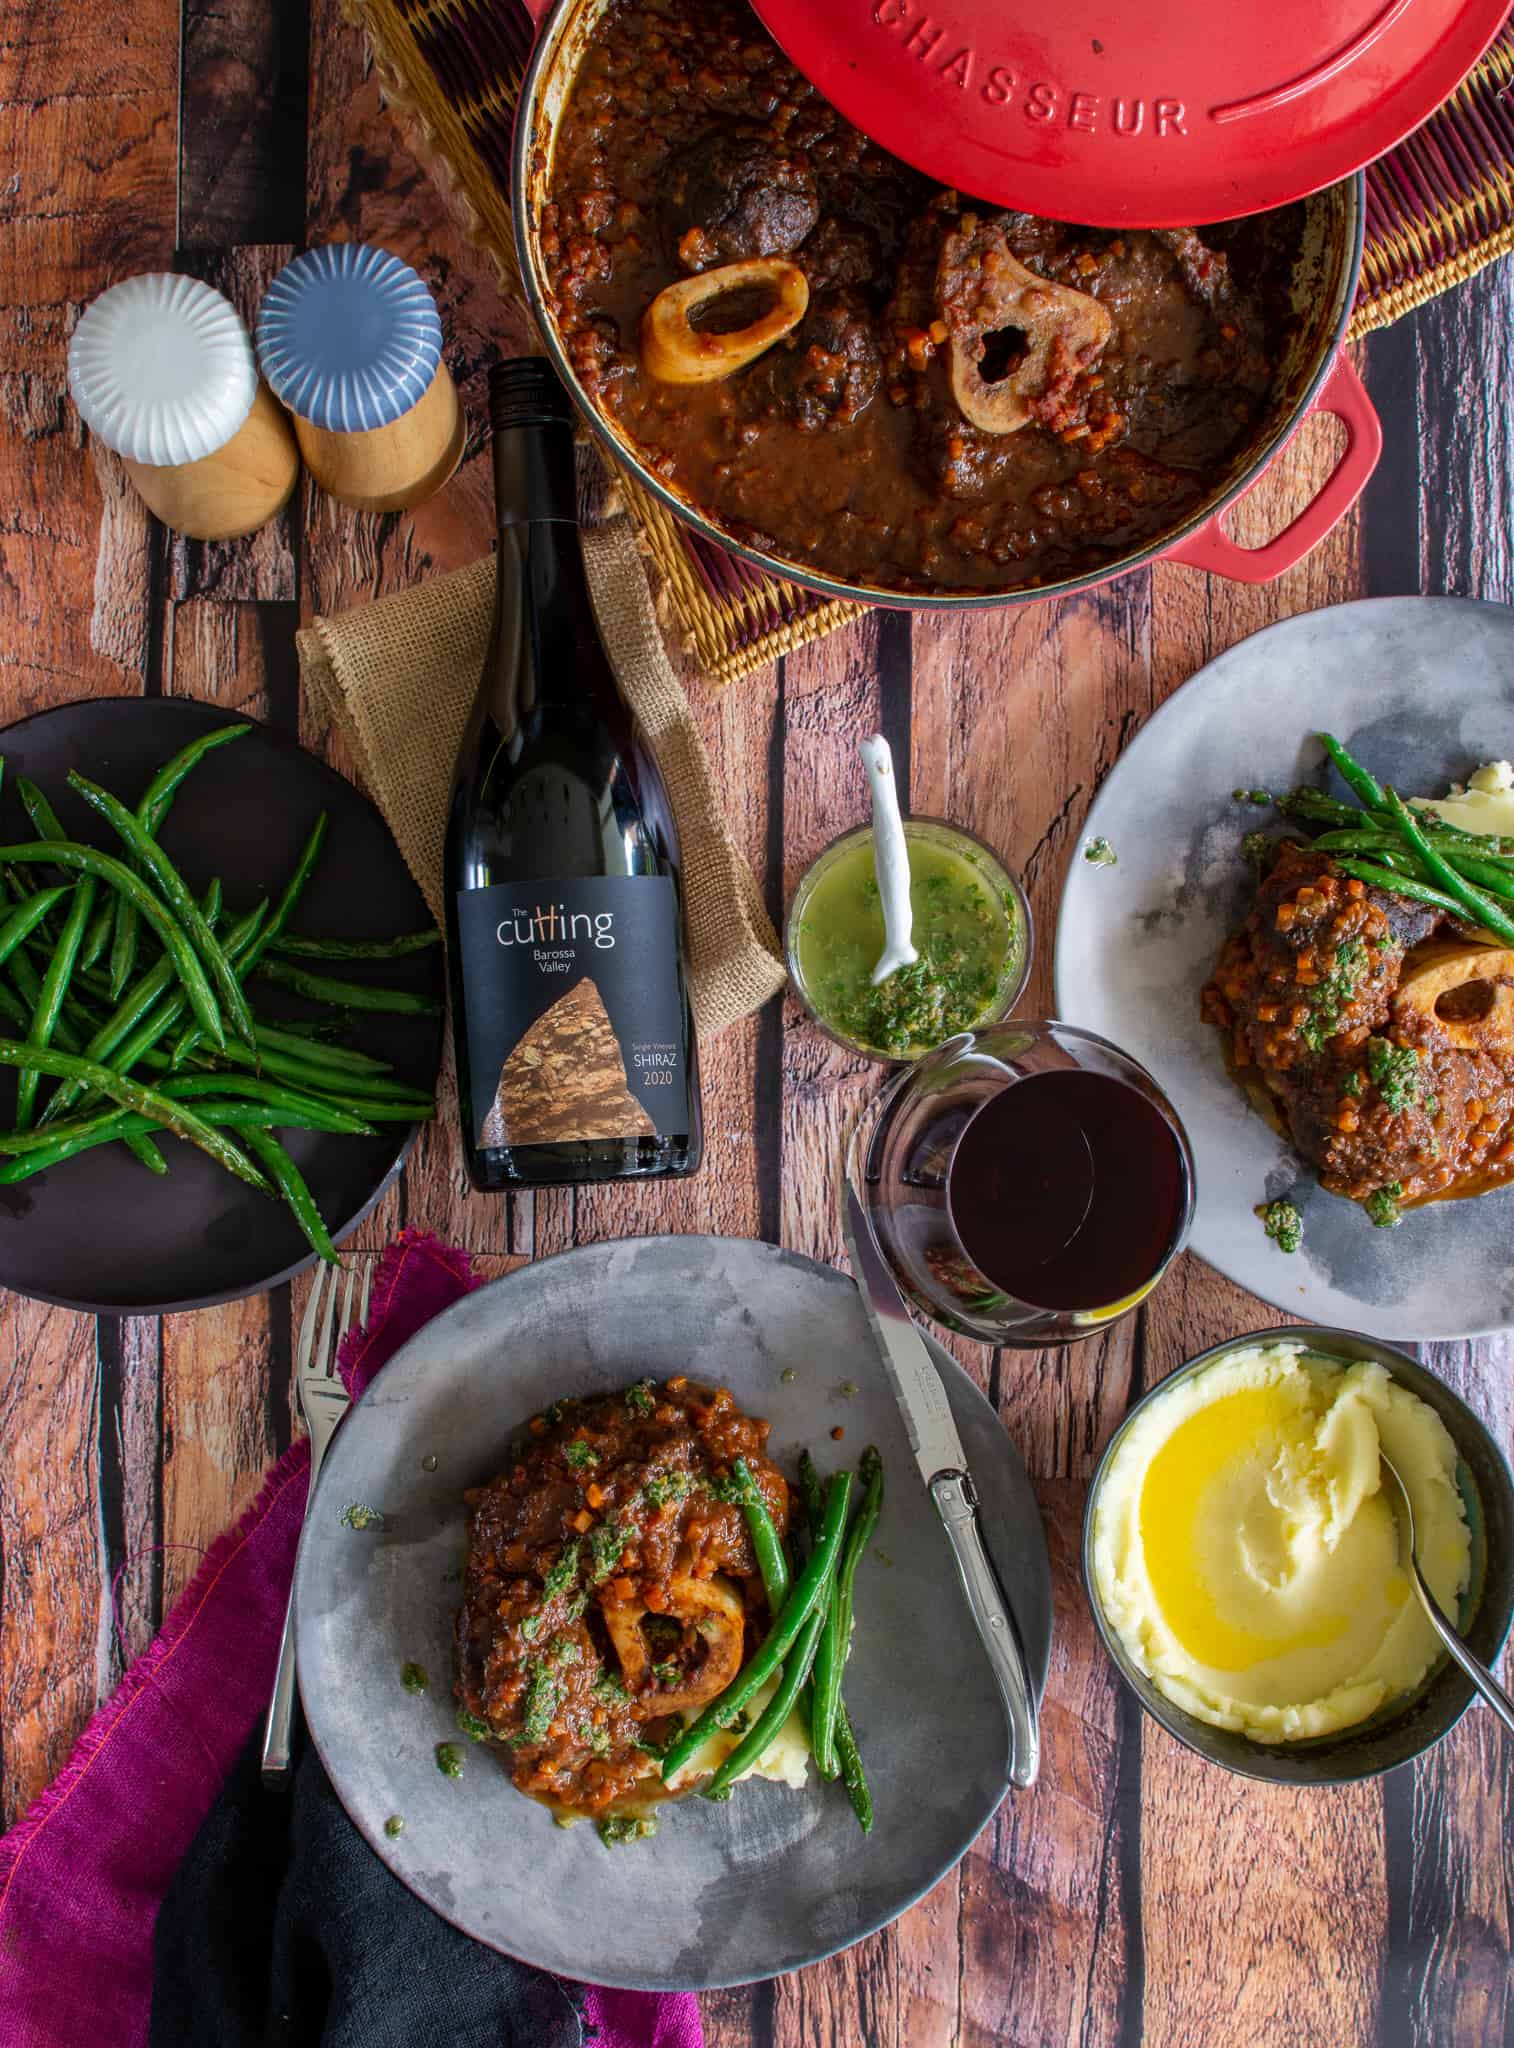 Beef ossobuco on a table with red wine, wine glasses and other food on plates and in bowls